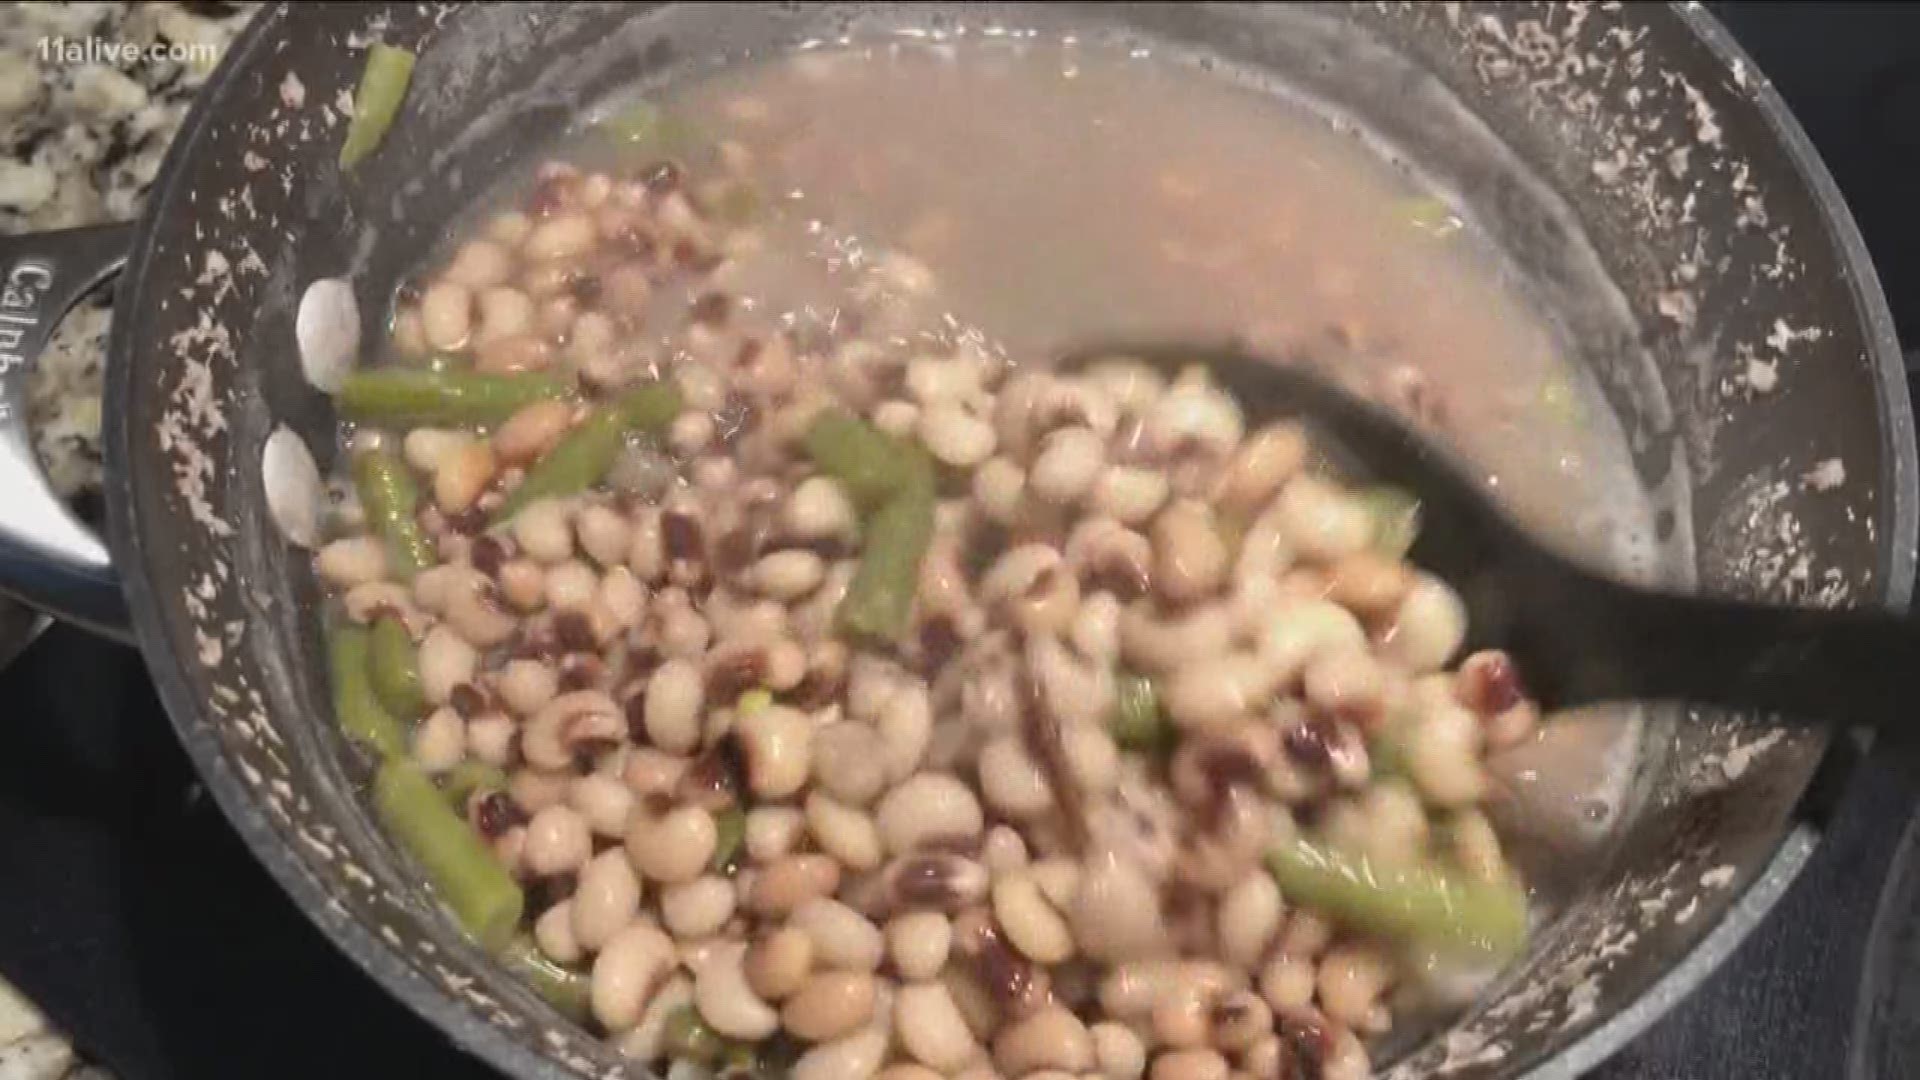 Why are black-eyed peas considered good luck?